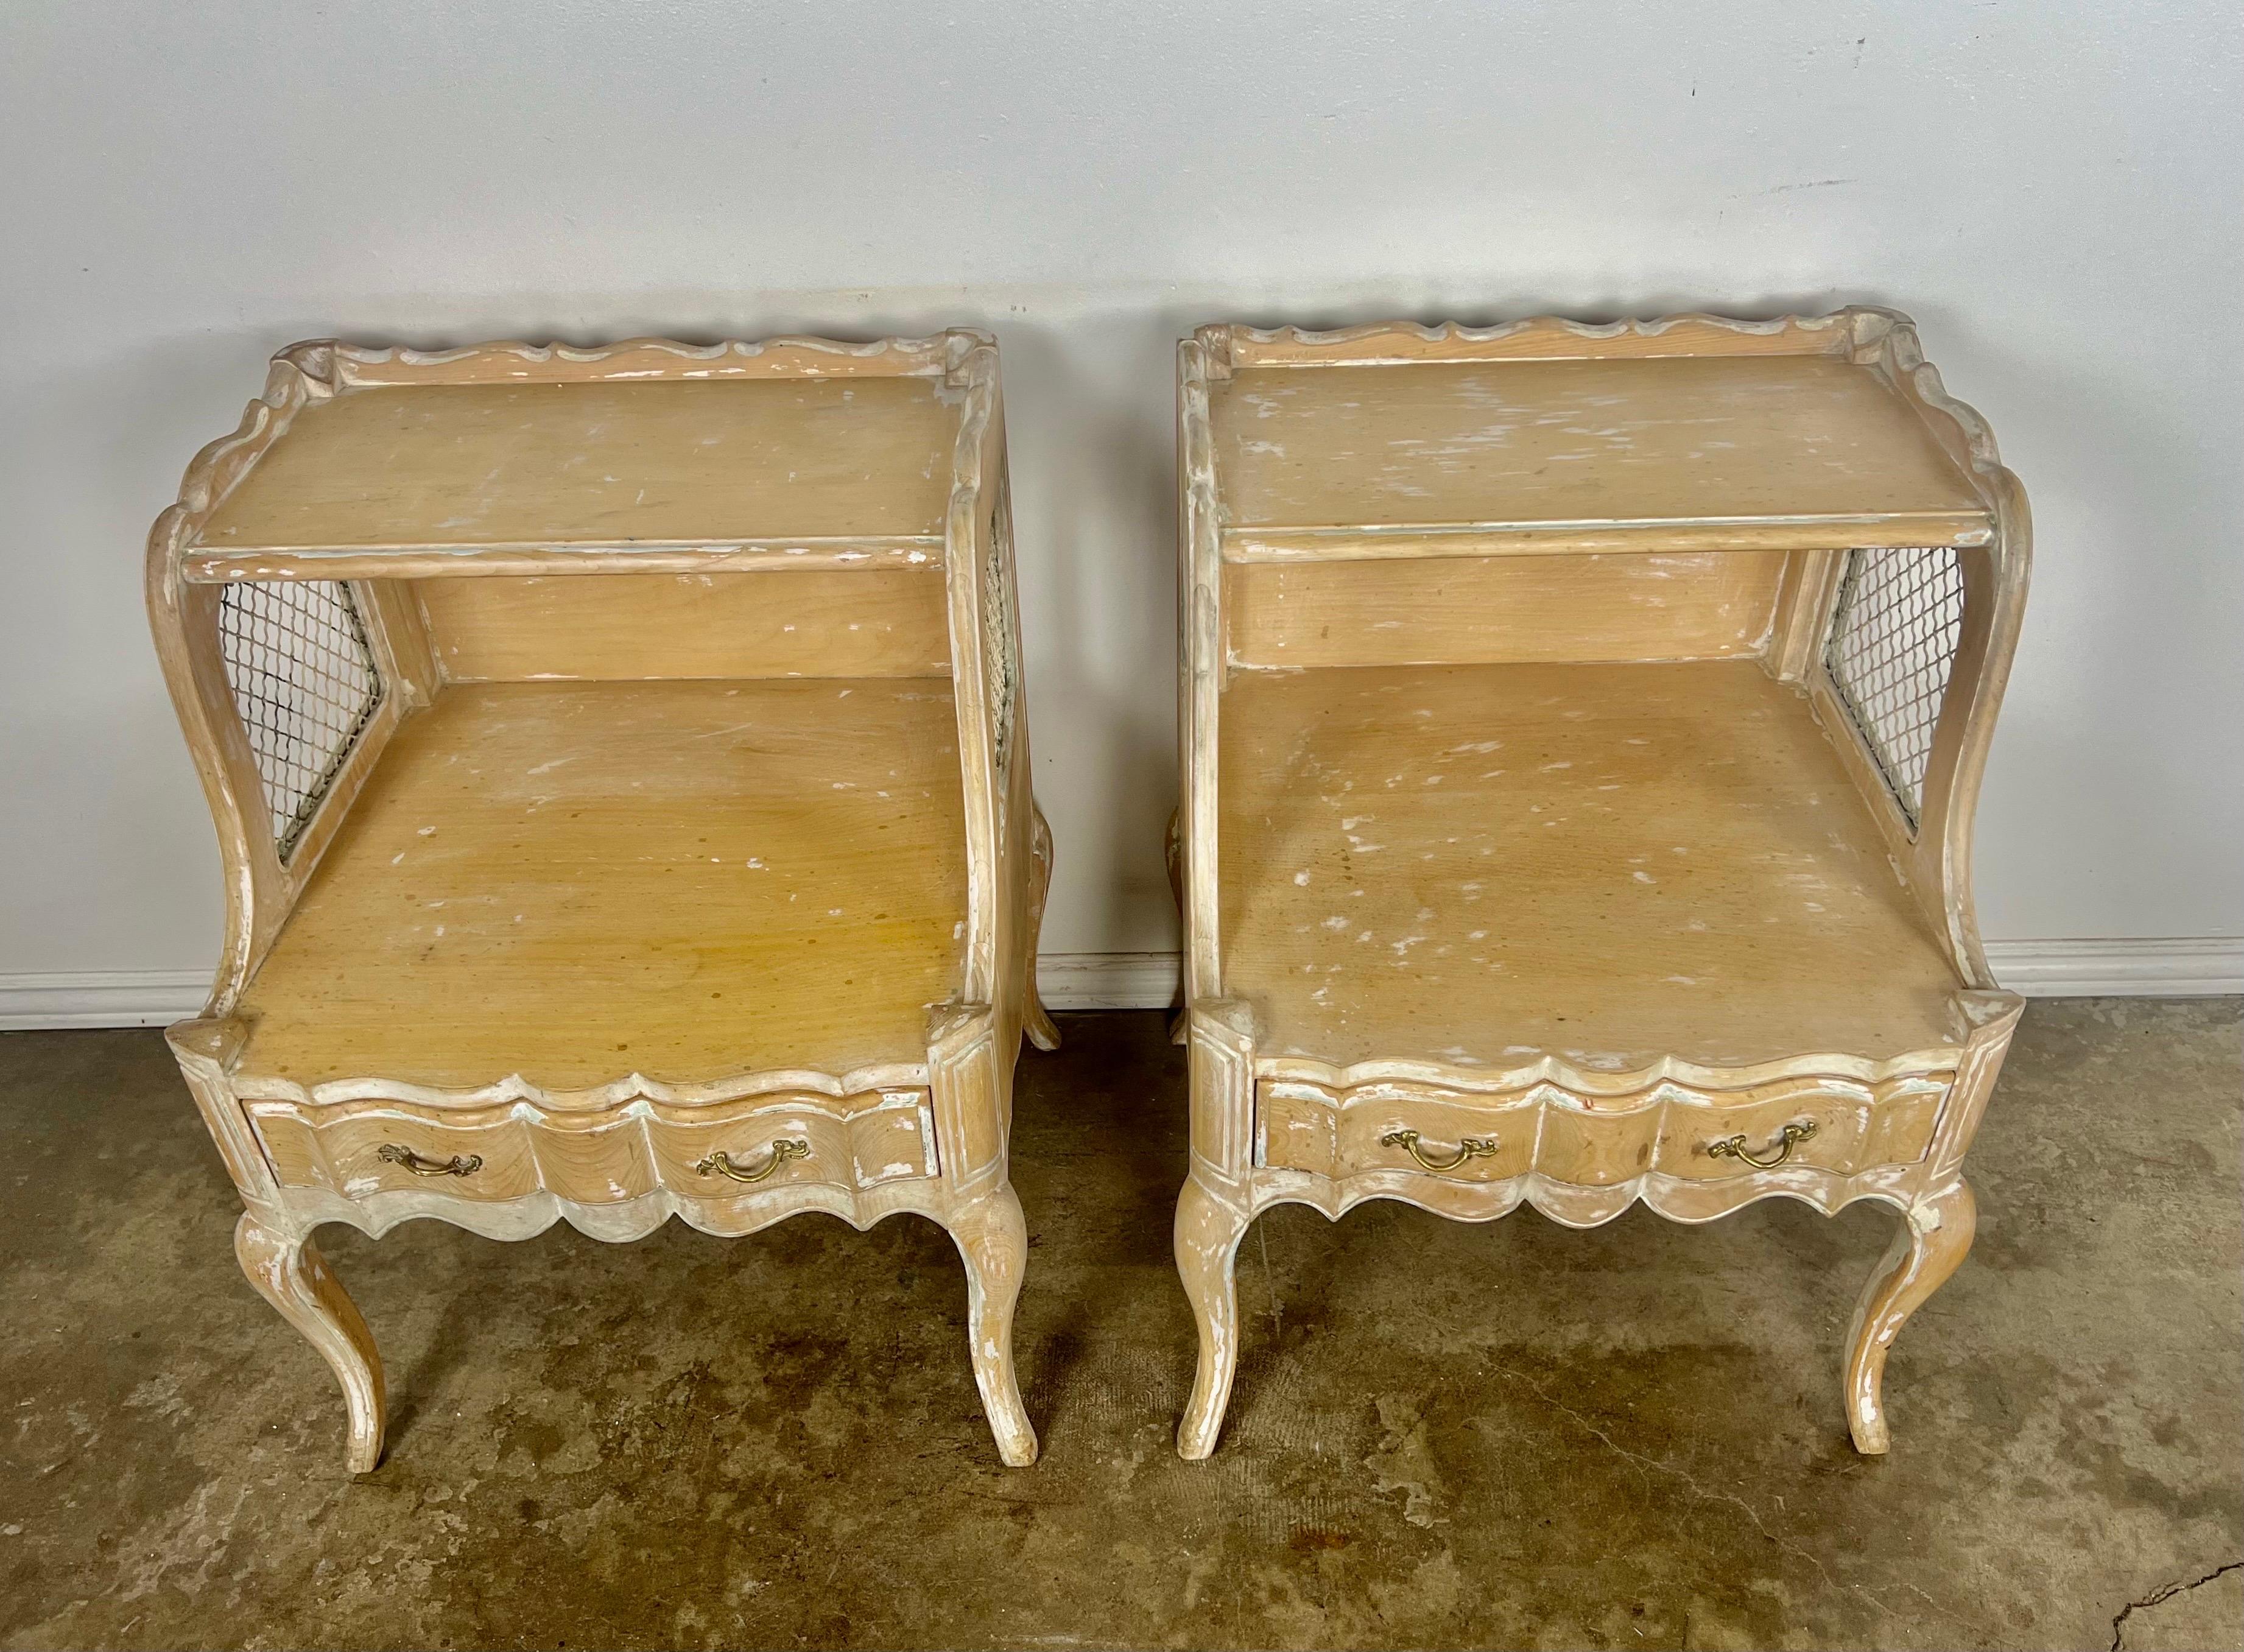 Pair of early 20th century two-tier side tables with drawers and iron grate insets on sides. The tables stand on four cabriole legs.  Weathered finish with paint remnants left throughout.  Great dove tailing on drawers.  Original brass hardware.